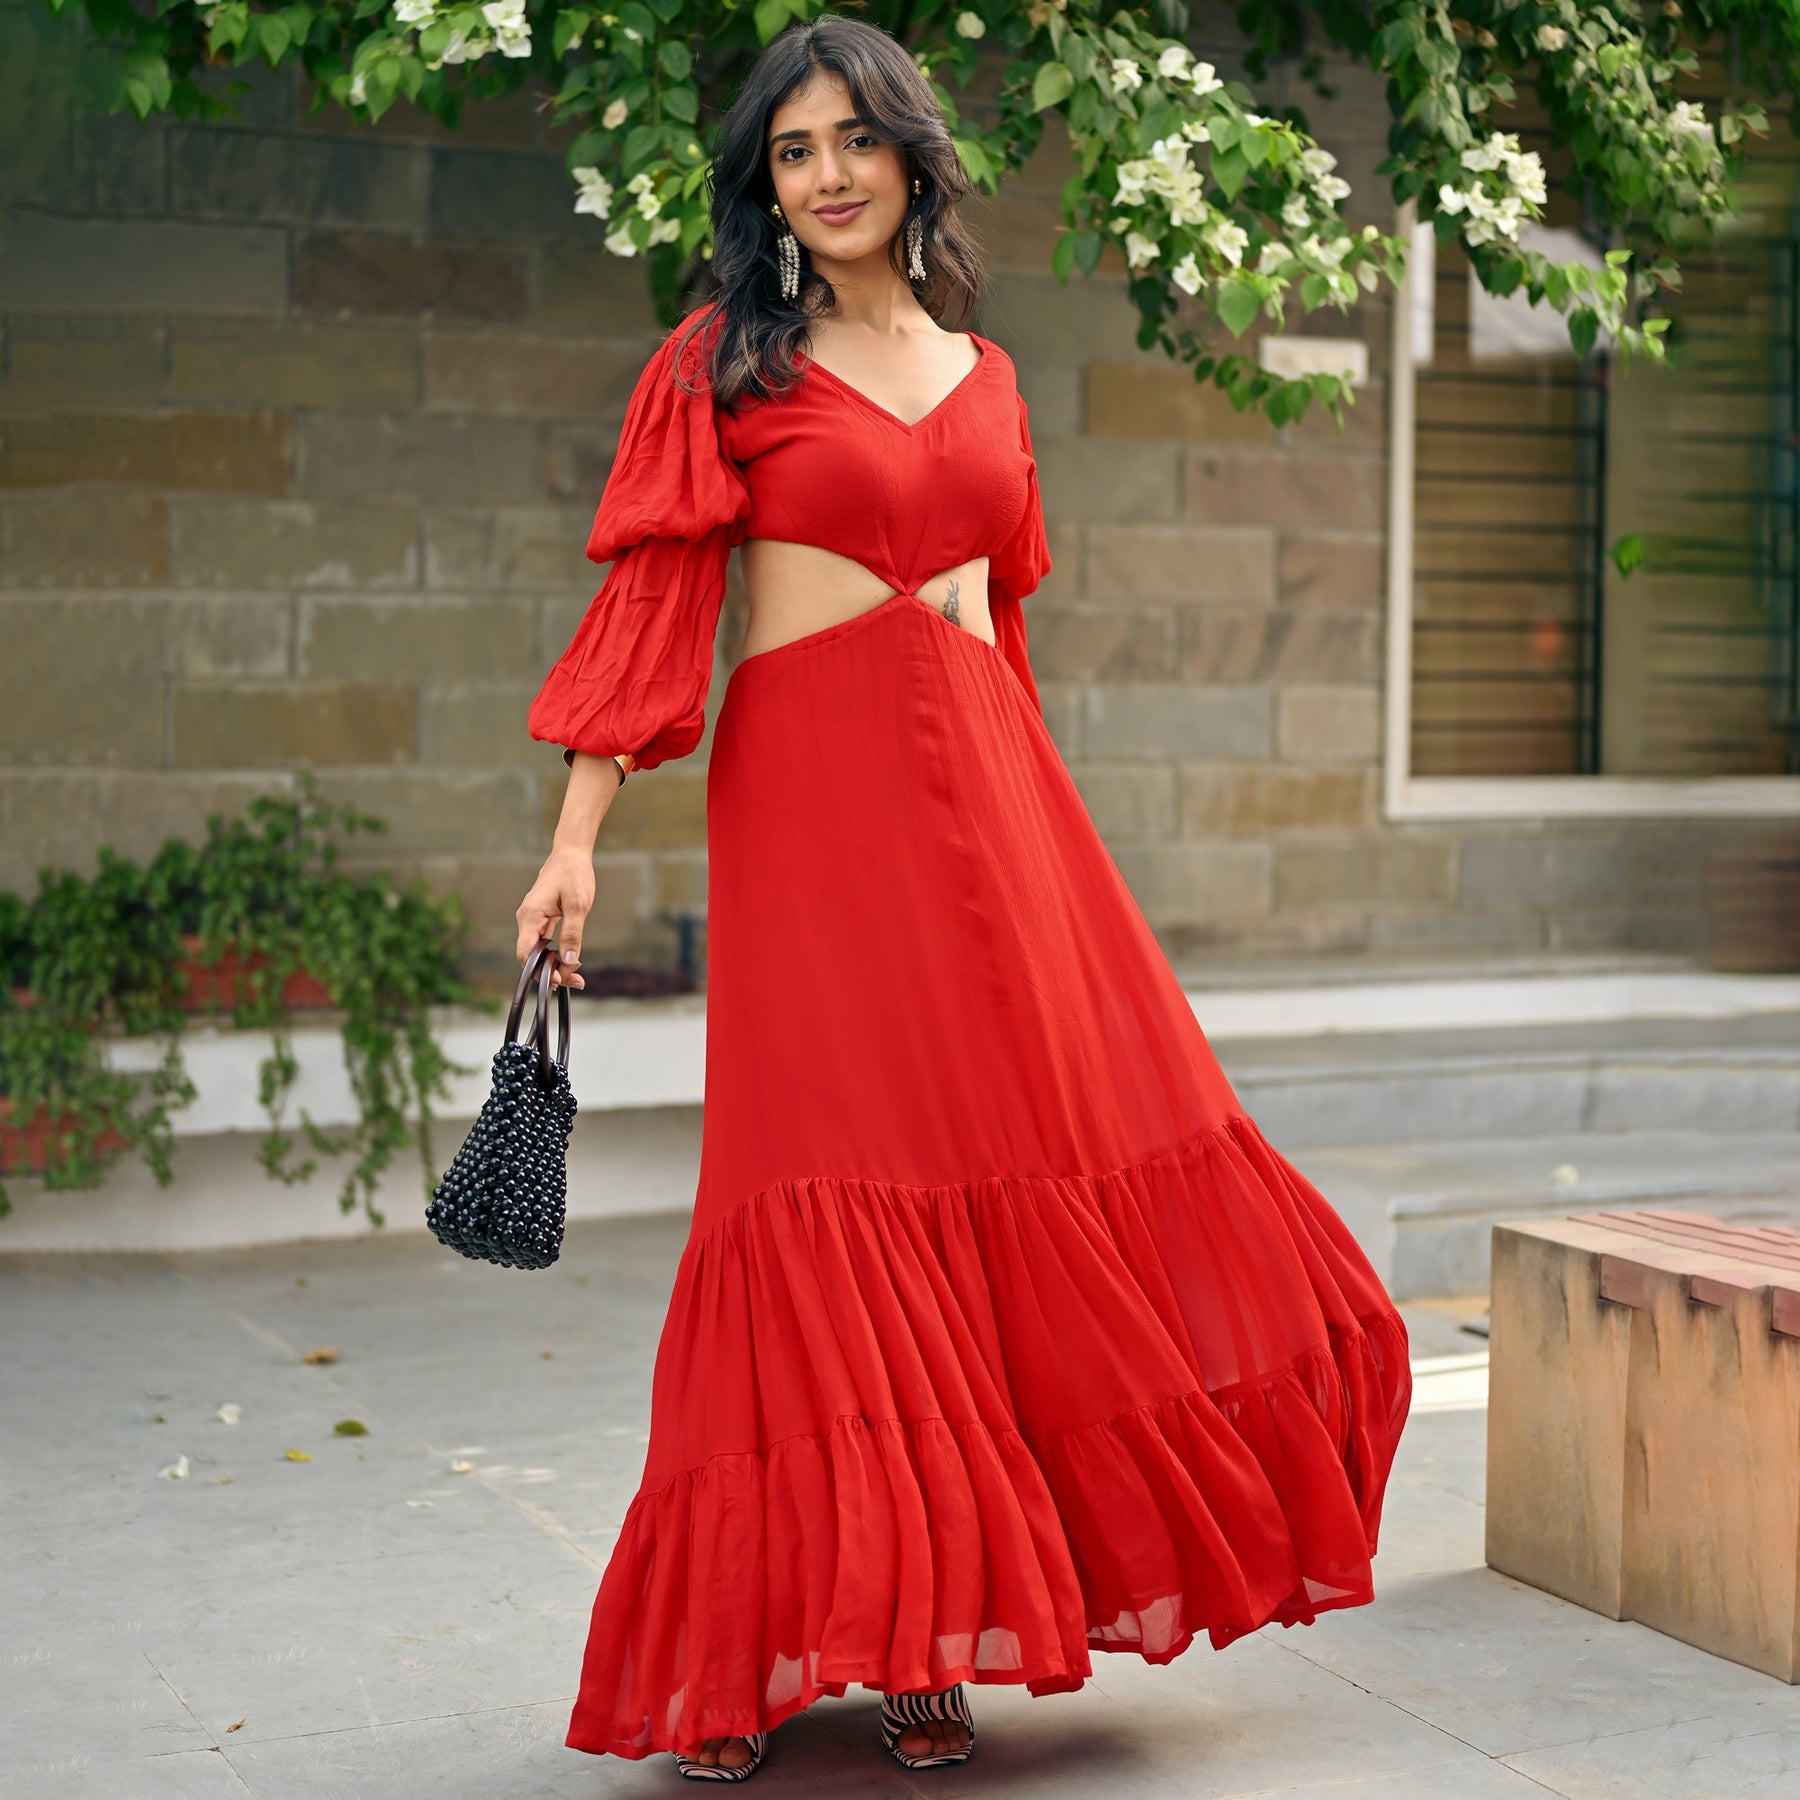 Buy Trending Women's Round Neck Taffeta Cotton Long Sleeve Red Gown size-M  at Amazon.in